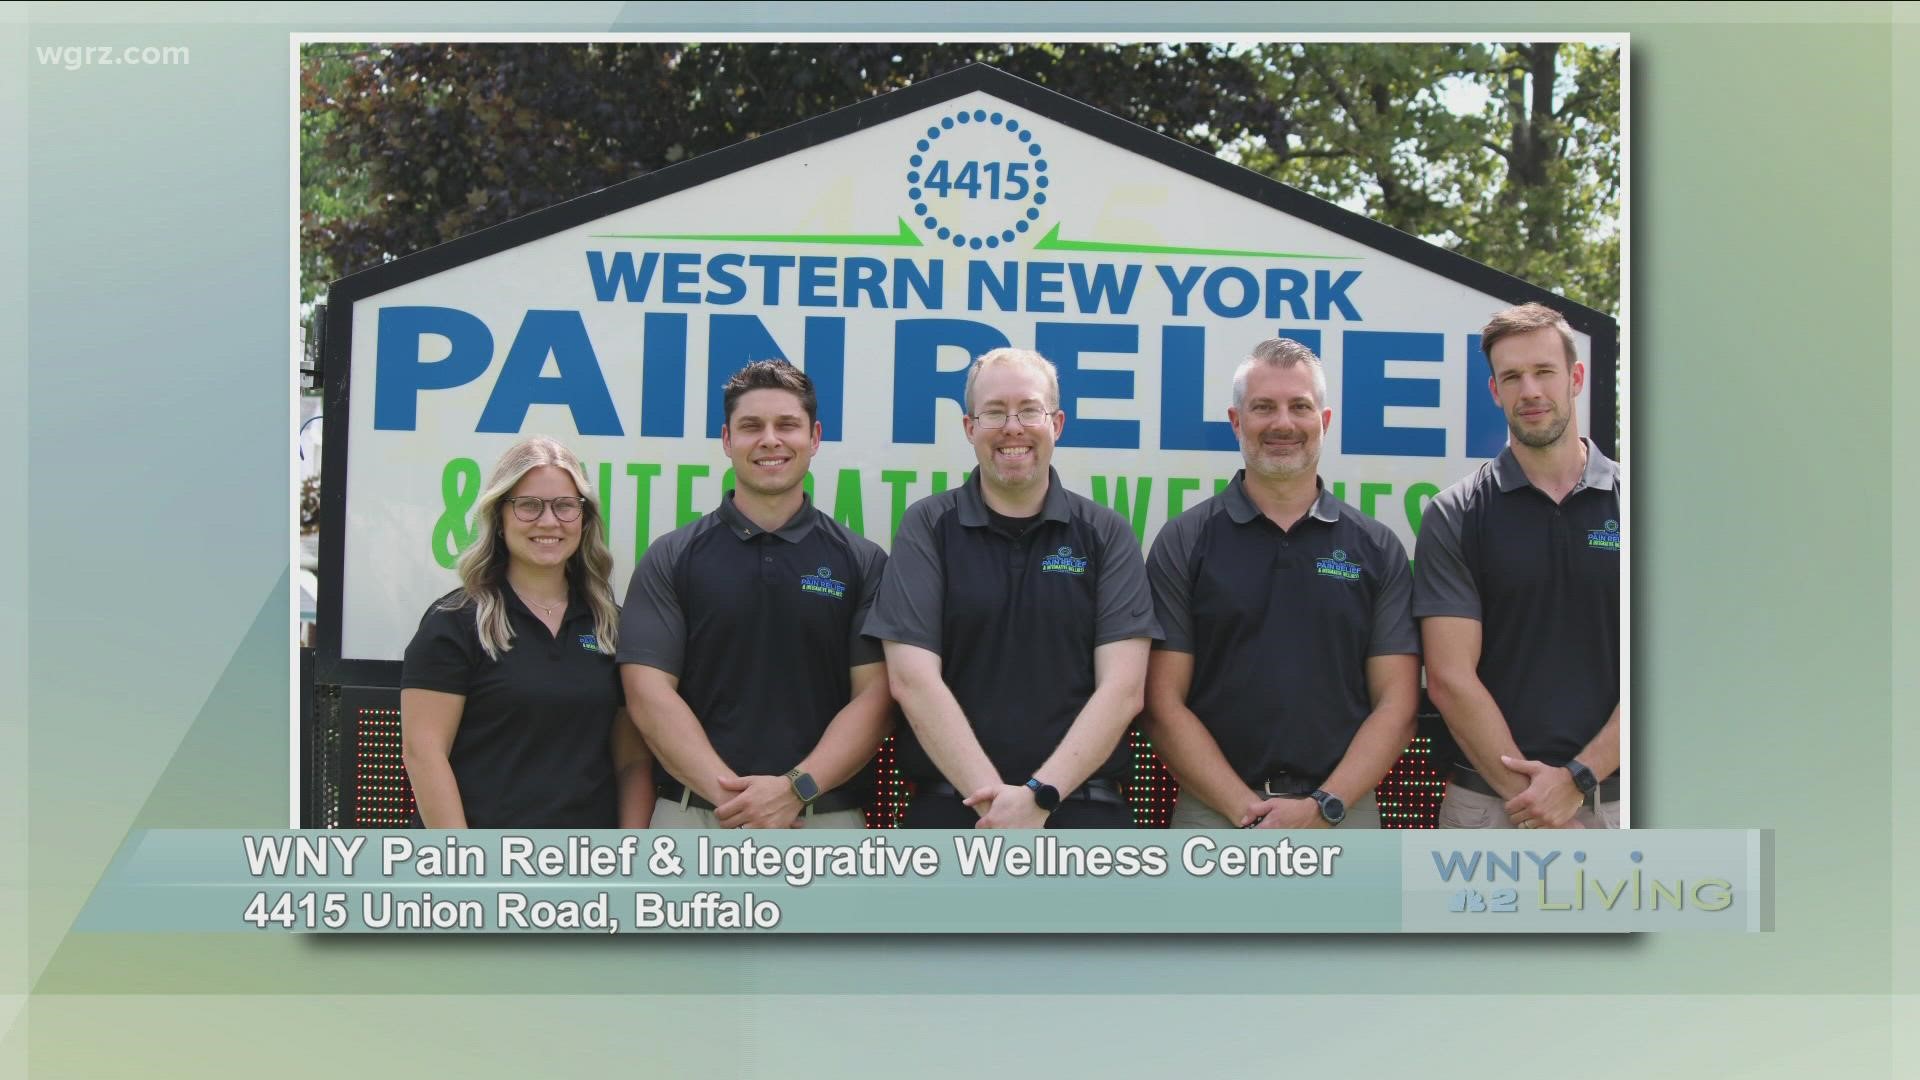 WNY Living - January 15 - WNY Pain Relief & Integrative Wellness Center (THIS VIDEO IS SPONSORED BY WNY PAIN RELIEF & INTEGRATIVE WELLNESS CENTER)